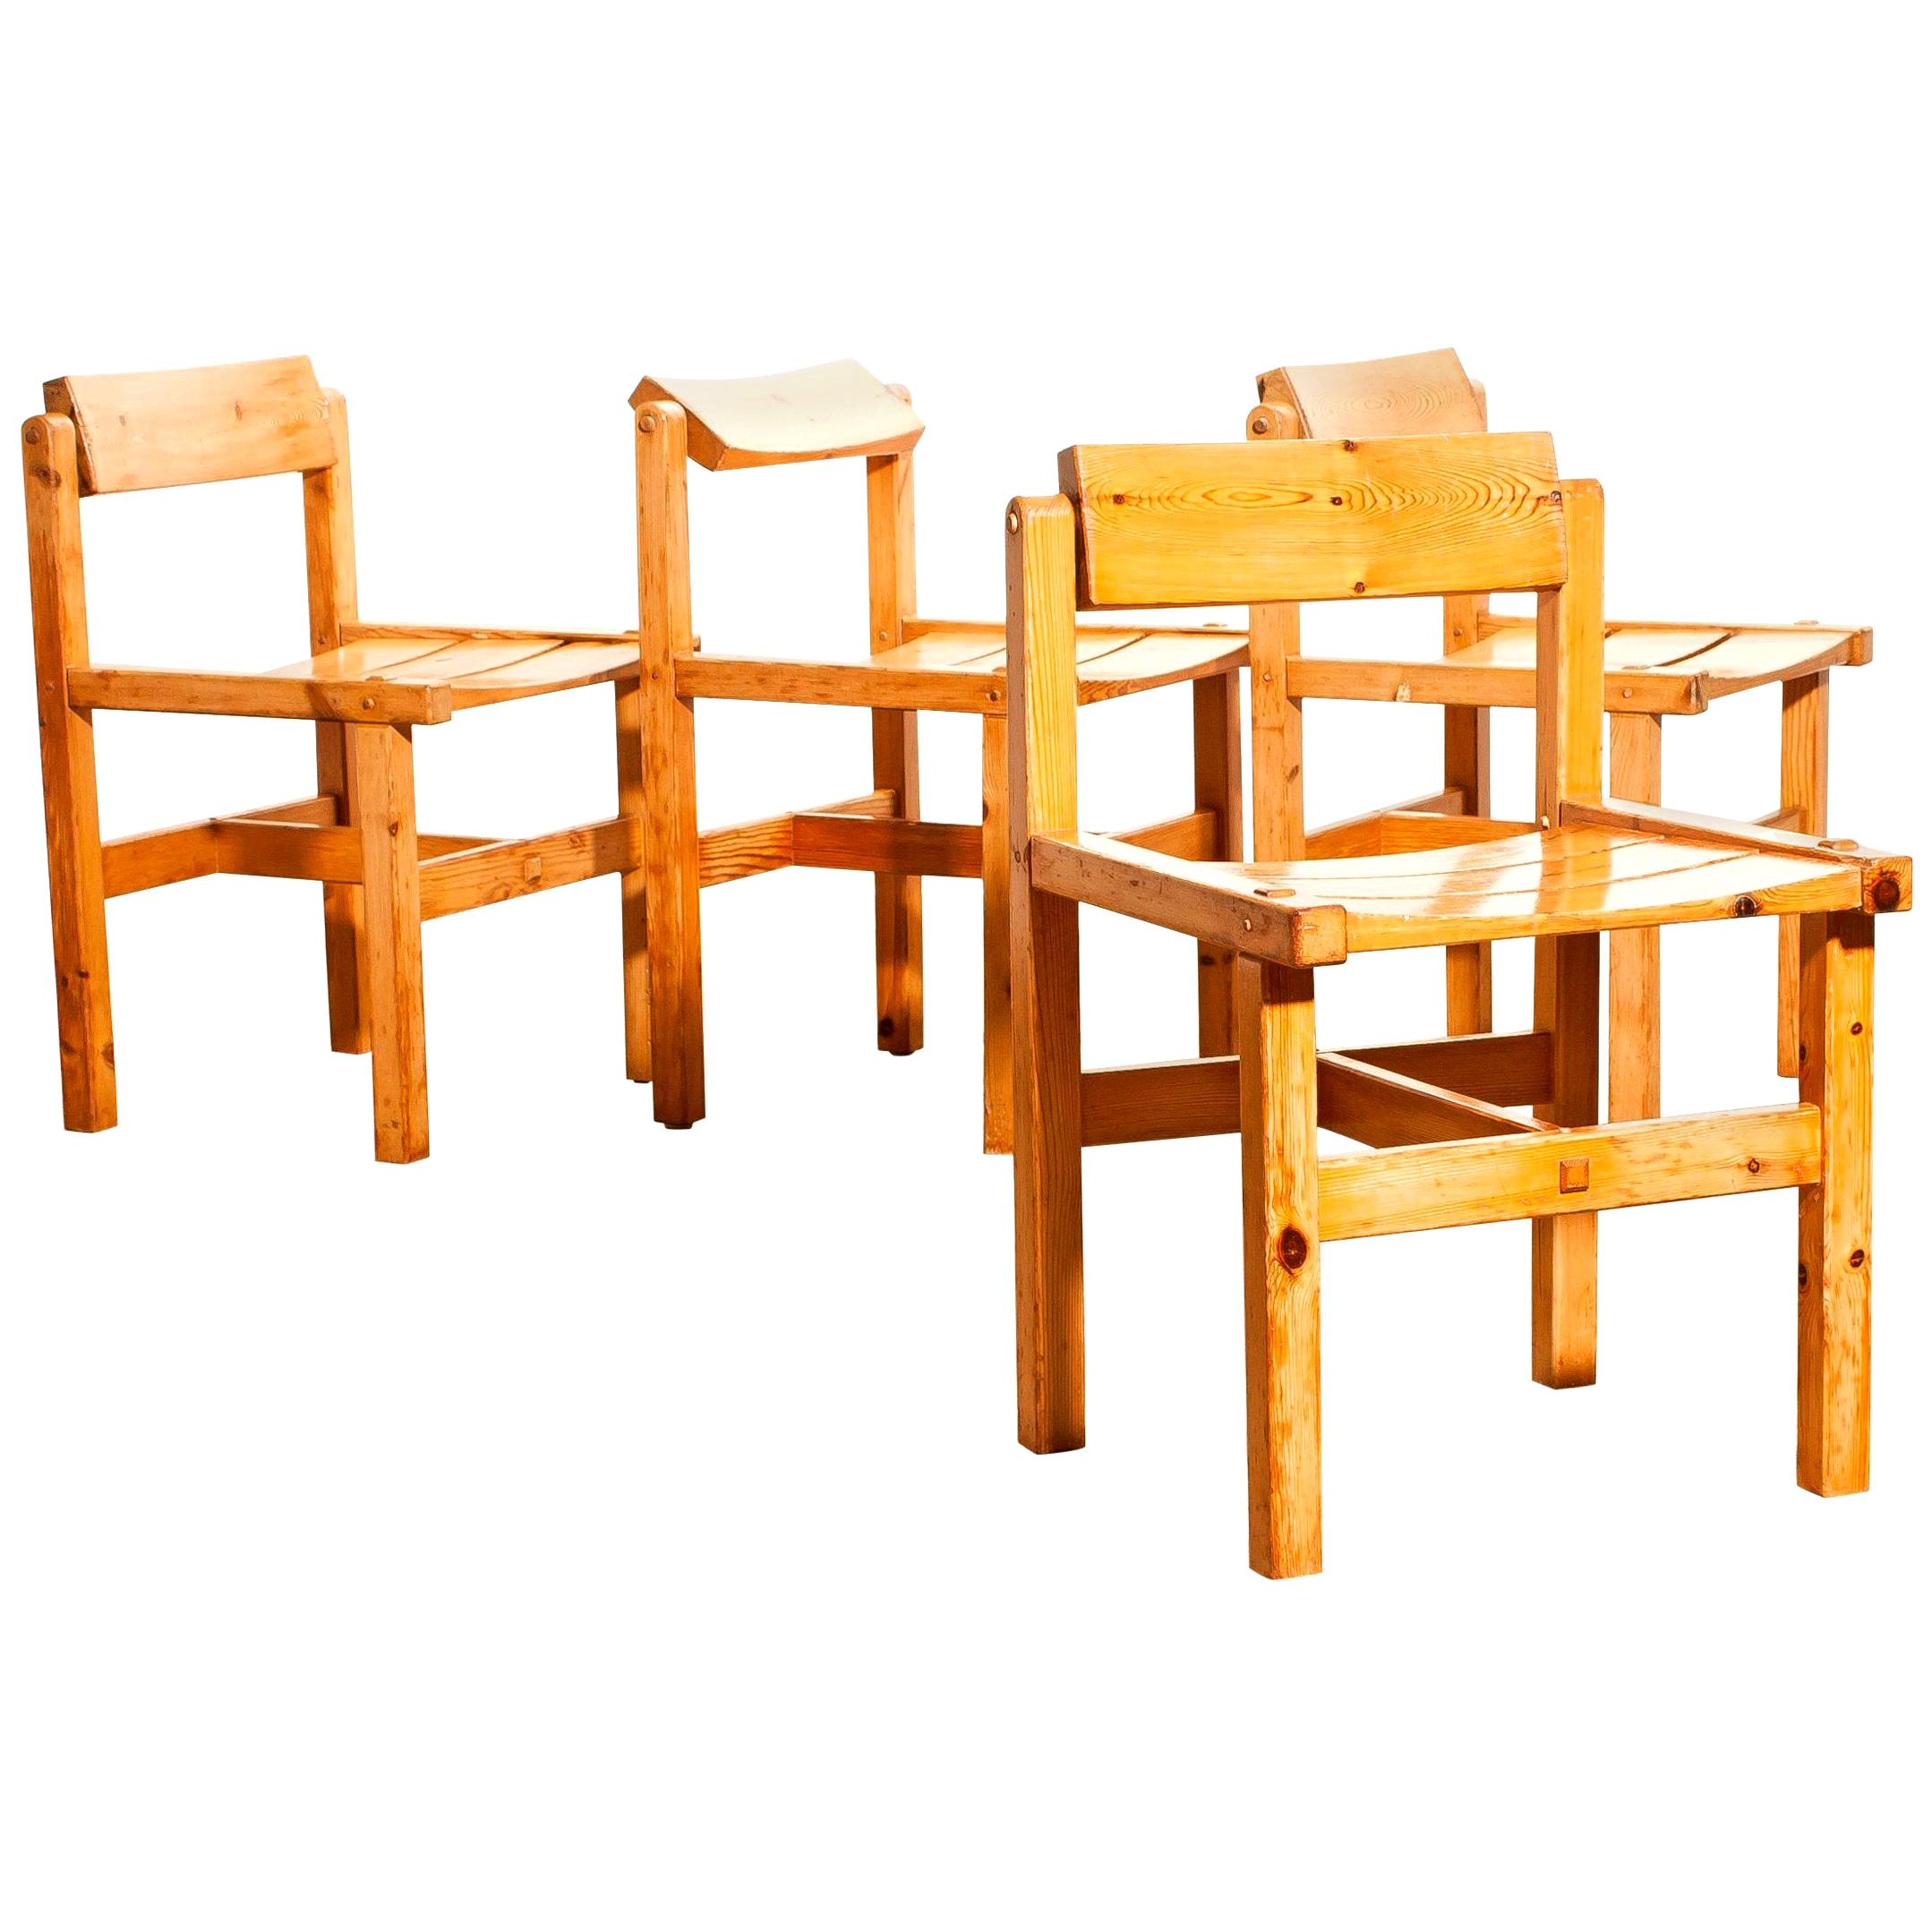 Very nice set of four chairs designed by Edvin Helseth.
These chairs are made of pine and they have turnable backrests.
They are in a beautiful used condition.
Period: 1960s.
Dimensions: H 74 cm x W 47 cm x D 41 cm x SH 47 cm.